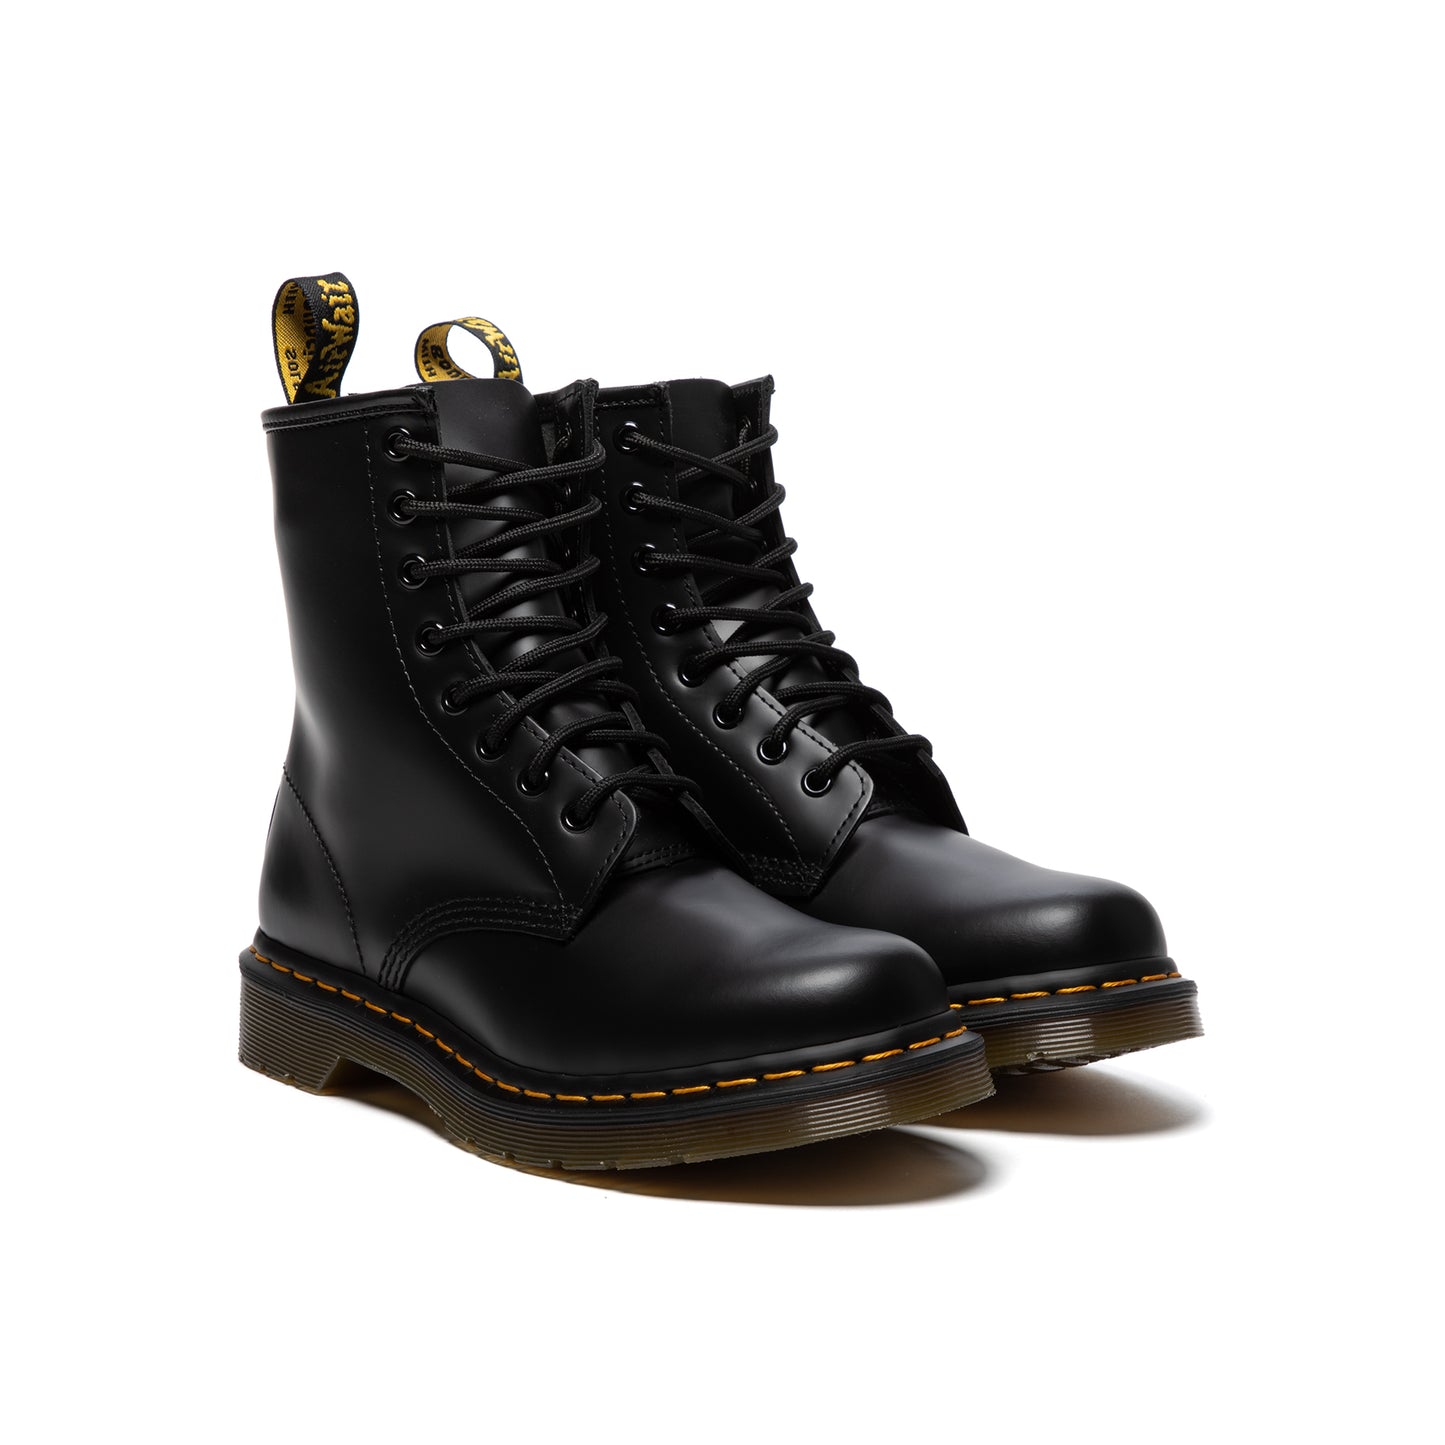 Dr. Martens Womens 1460 Smooth Leather Lace Up Boots (Black Smooth)